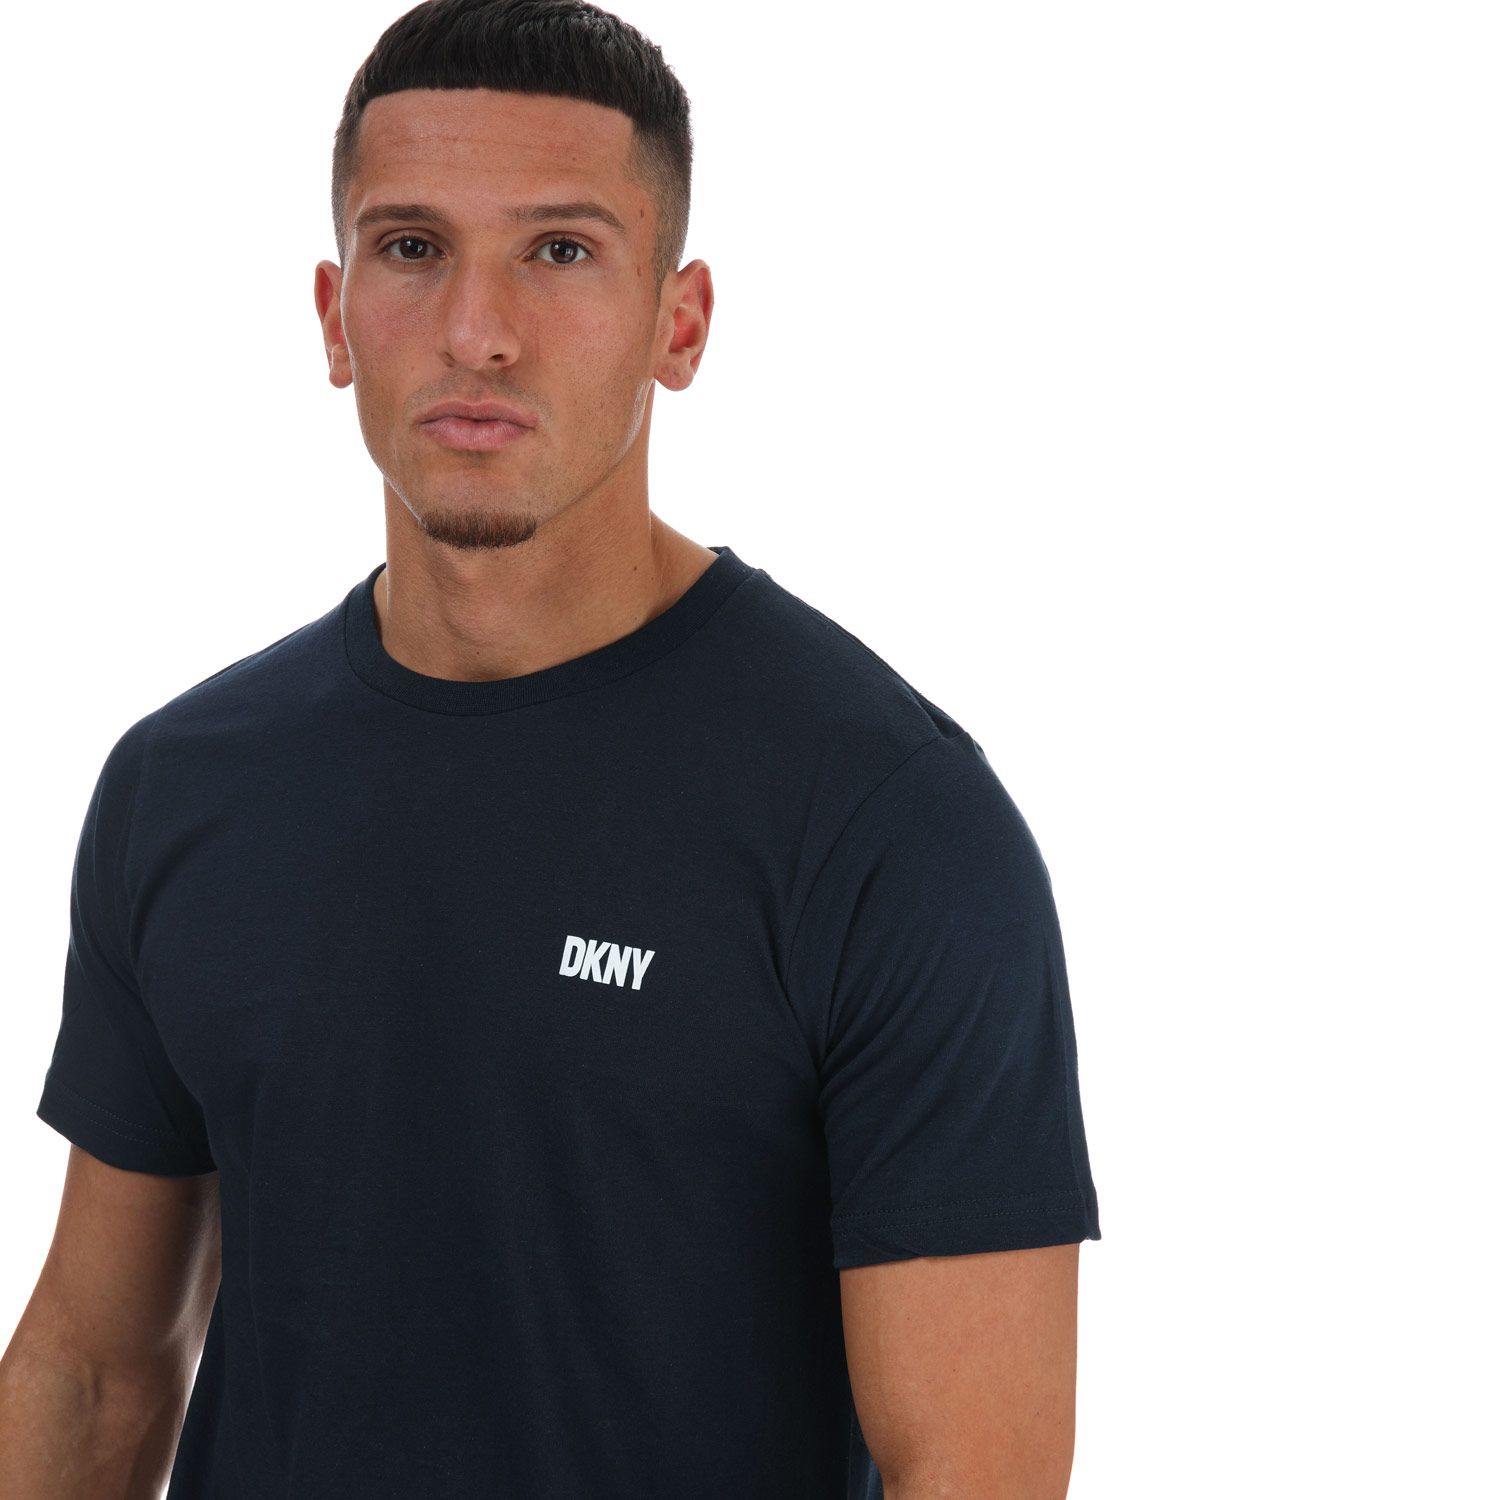 DKNY Mens Giants 3 Pack Lounge T-Shirts in White Navy